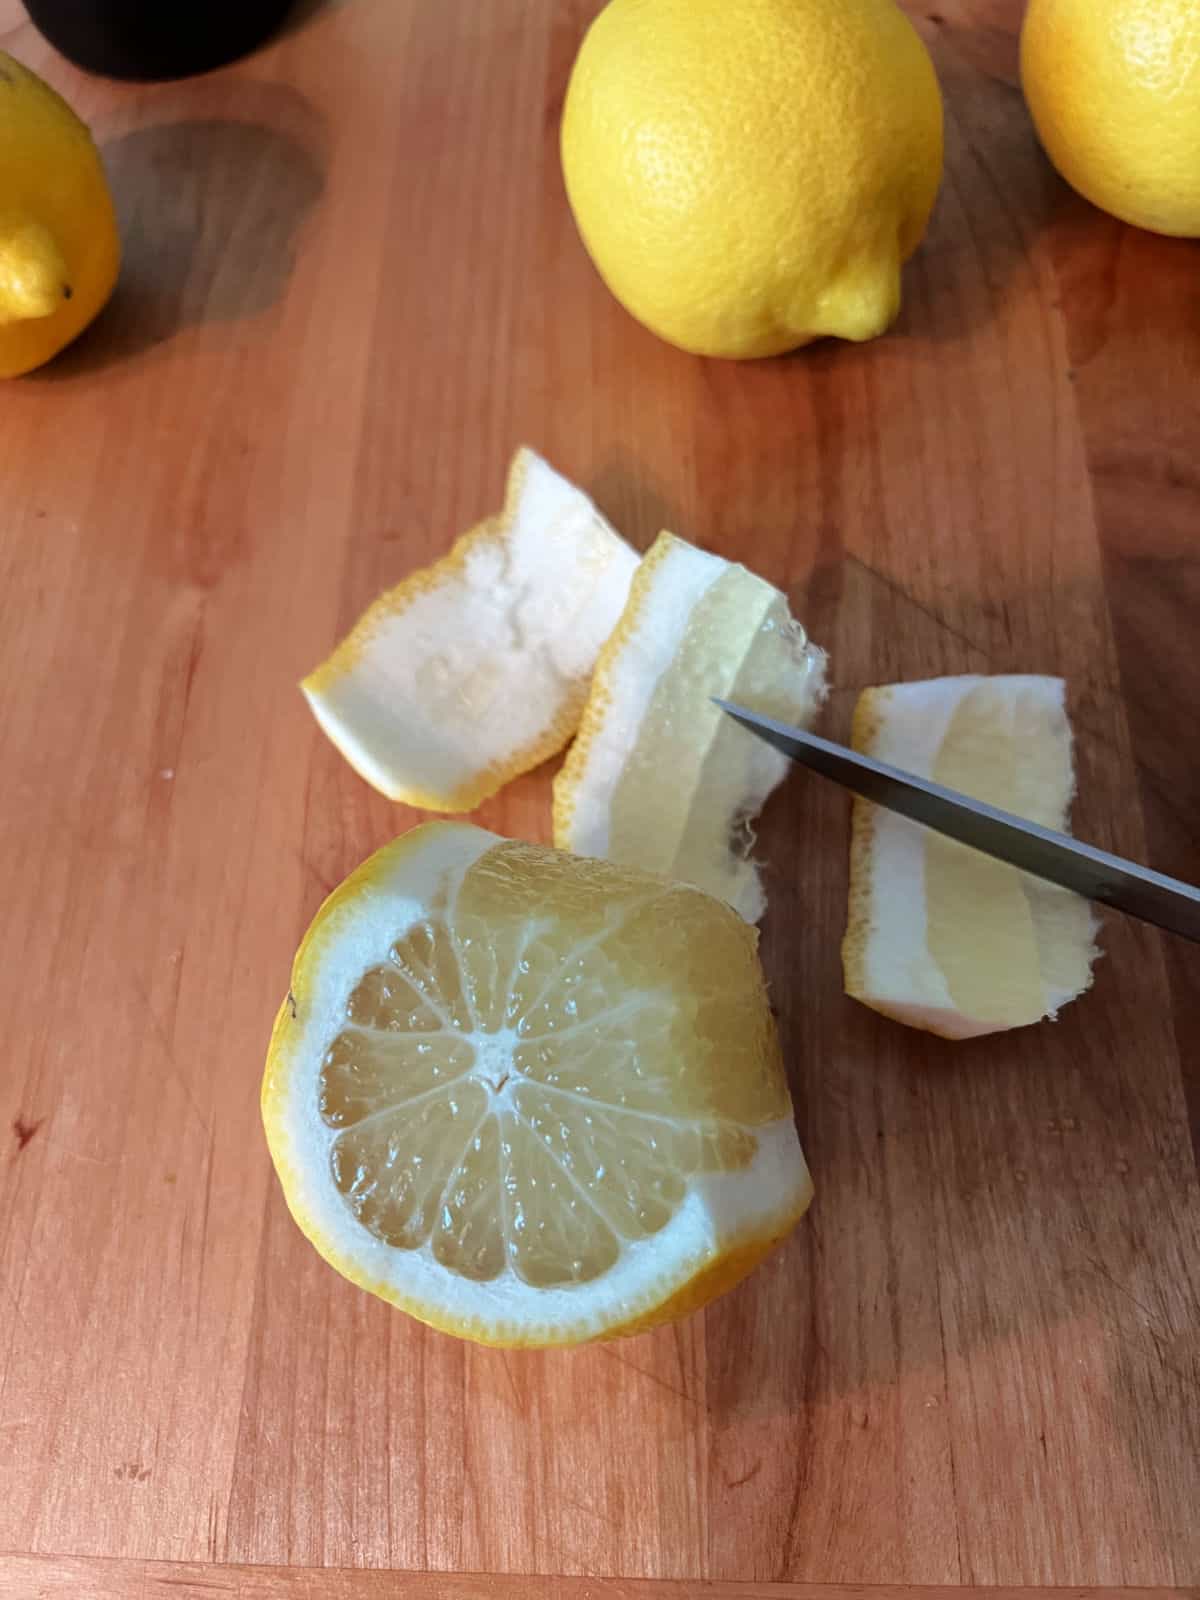 Cutting the peel from a whole lemon.